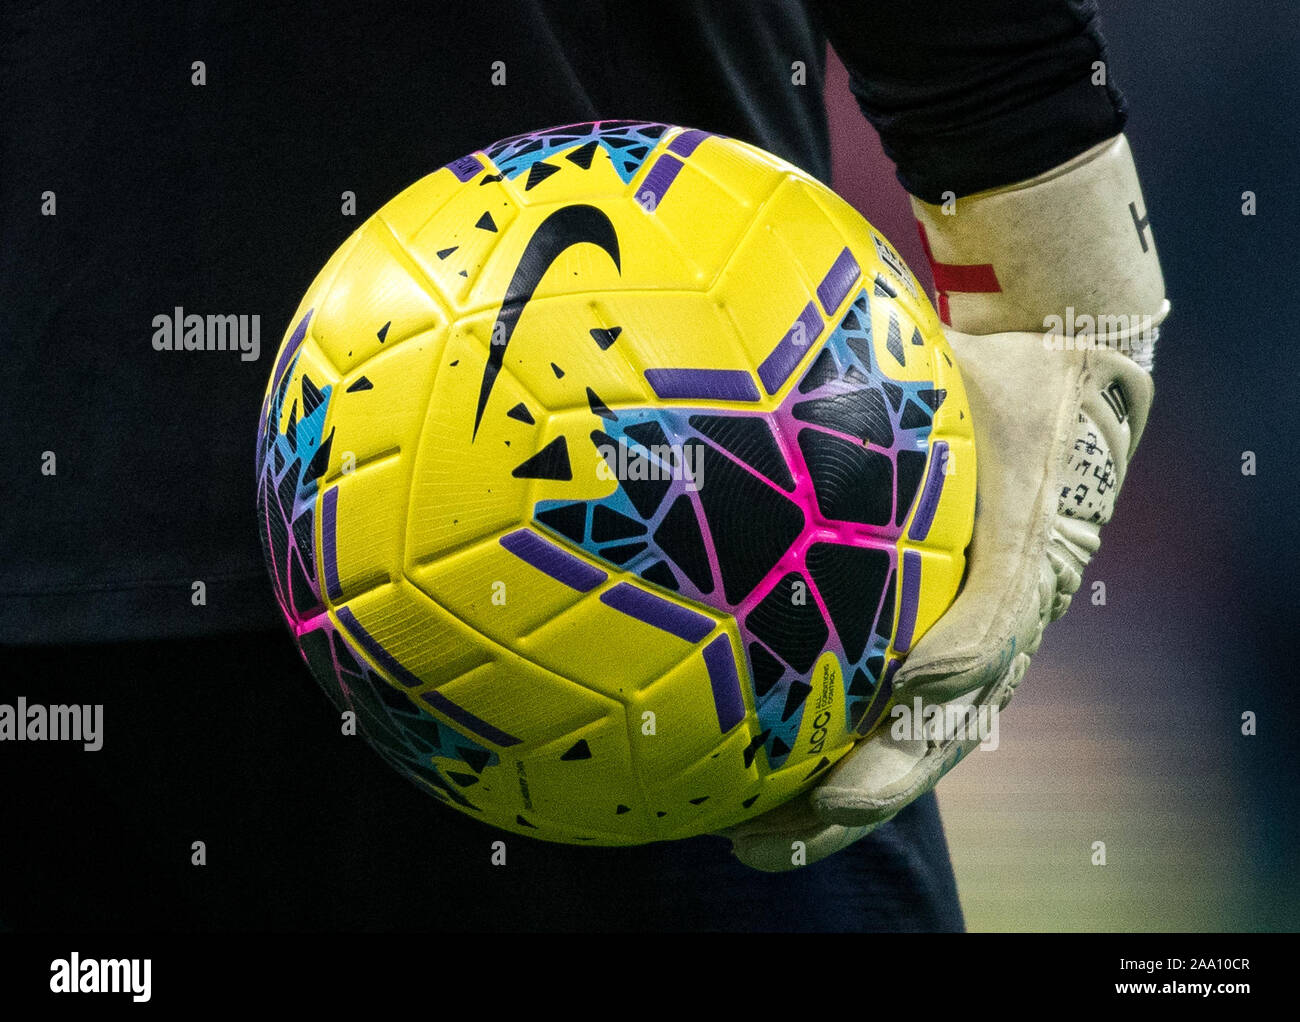 London, UK. 14th Nov, 2019. Nike football pre match during the UEFA Euro 2020 qualifier International match between England and Montenegro at Wembley Stadium, London, England on 14 November 2019. Photo by Andy Rowland. Credit: PRiME Media Images/Alamy Live News Stock Photo